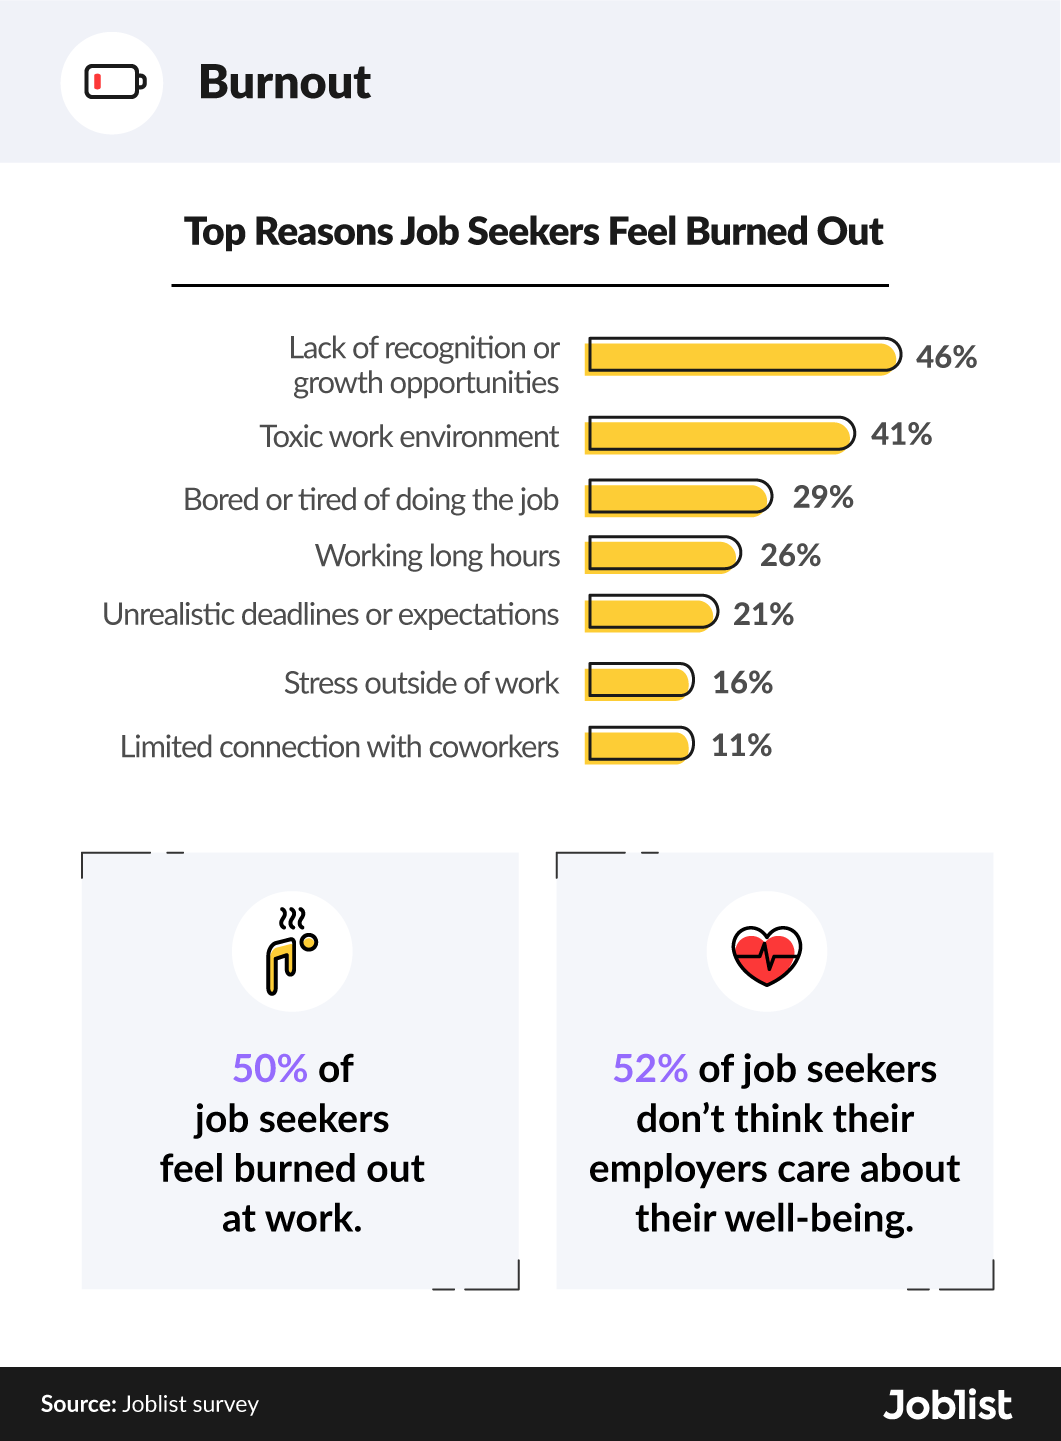 Infographic explaining the top reasons job seekers feel burned out.